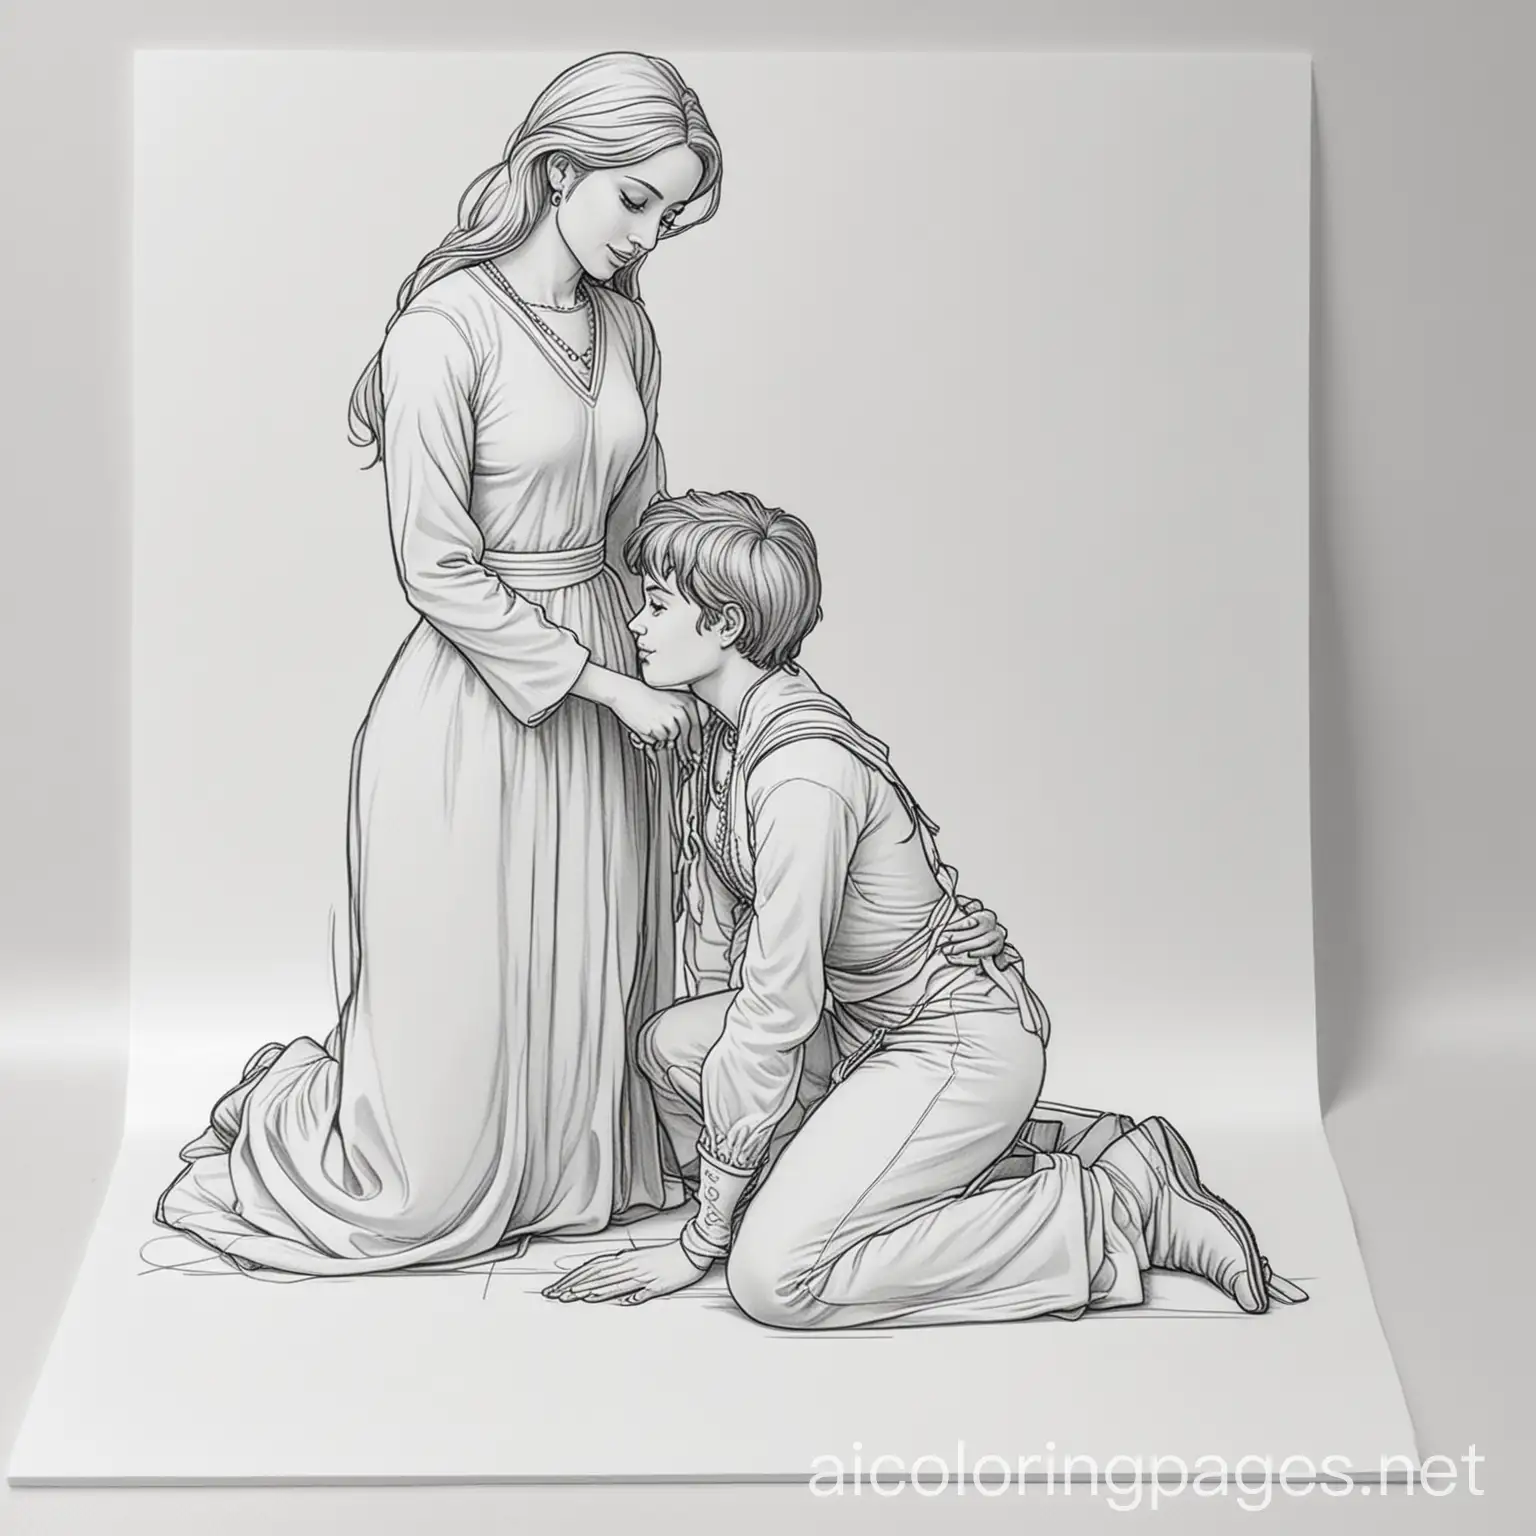 guy kneeling for his mistress, Coloring Page, black and white, line art, white background, Simplicity, Ample White Space. The background of the coloring page is plain white to make it easy for young children to color within the lines. The outlines of all the subjects are easy to distinguish, making it simple for kids to color without too much difficulty